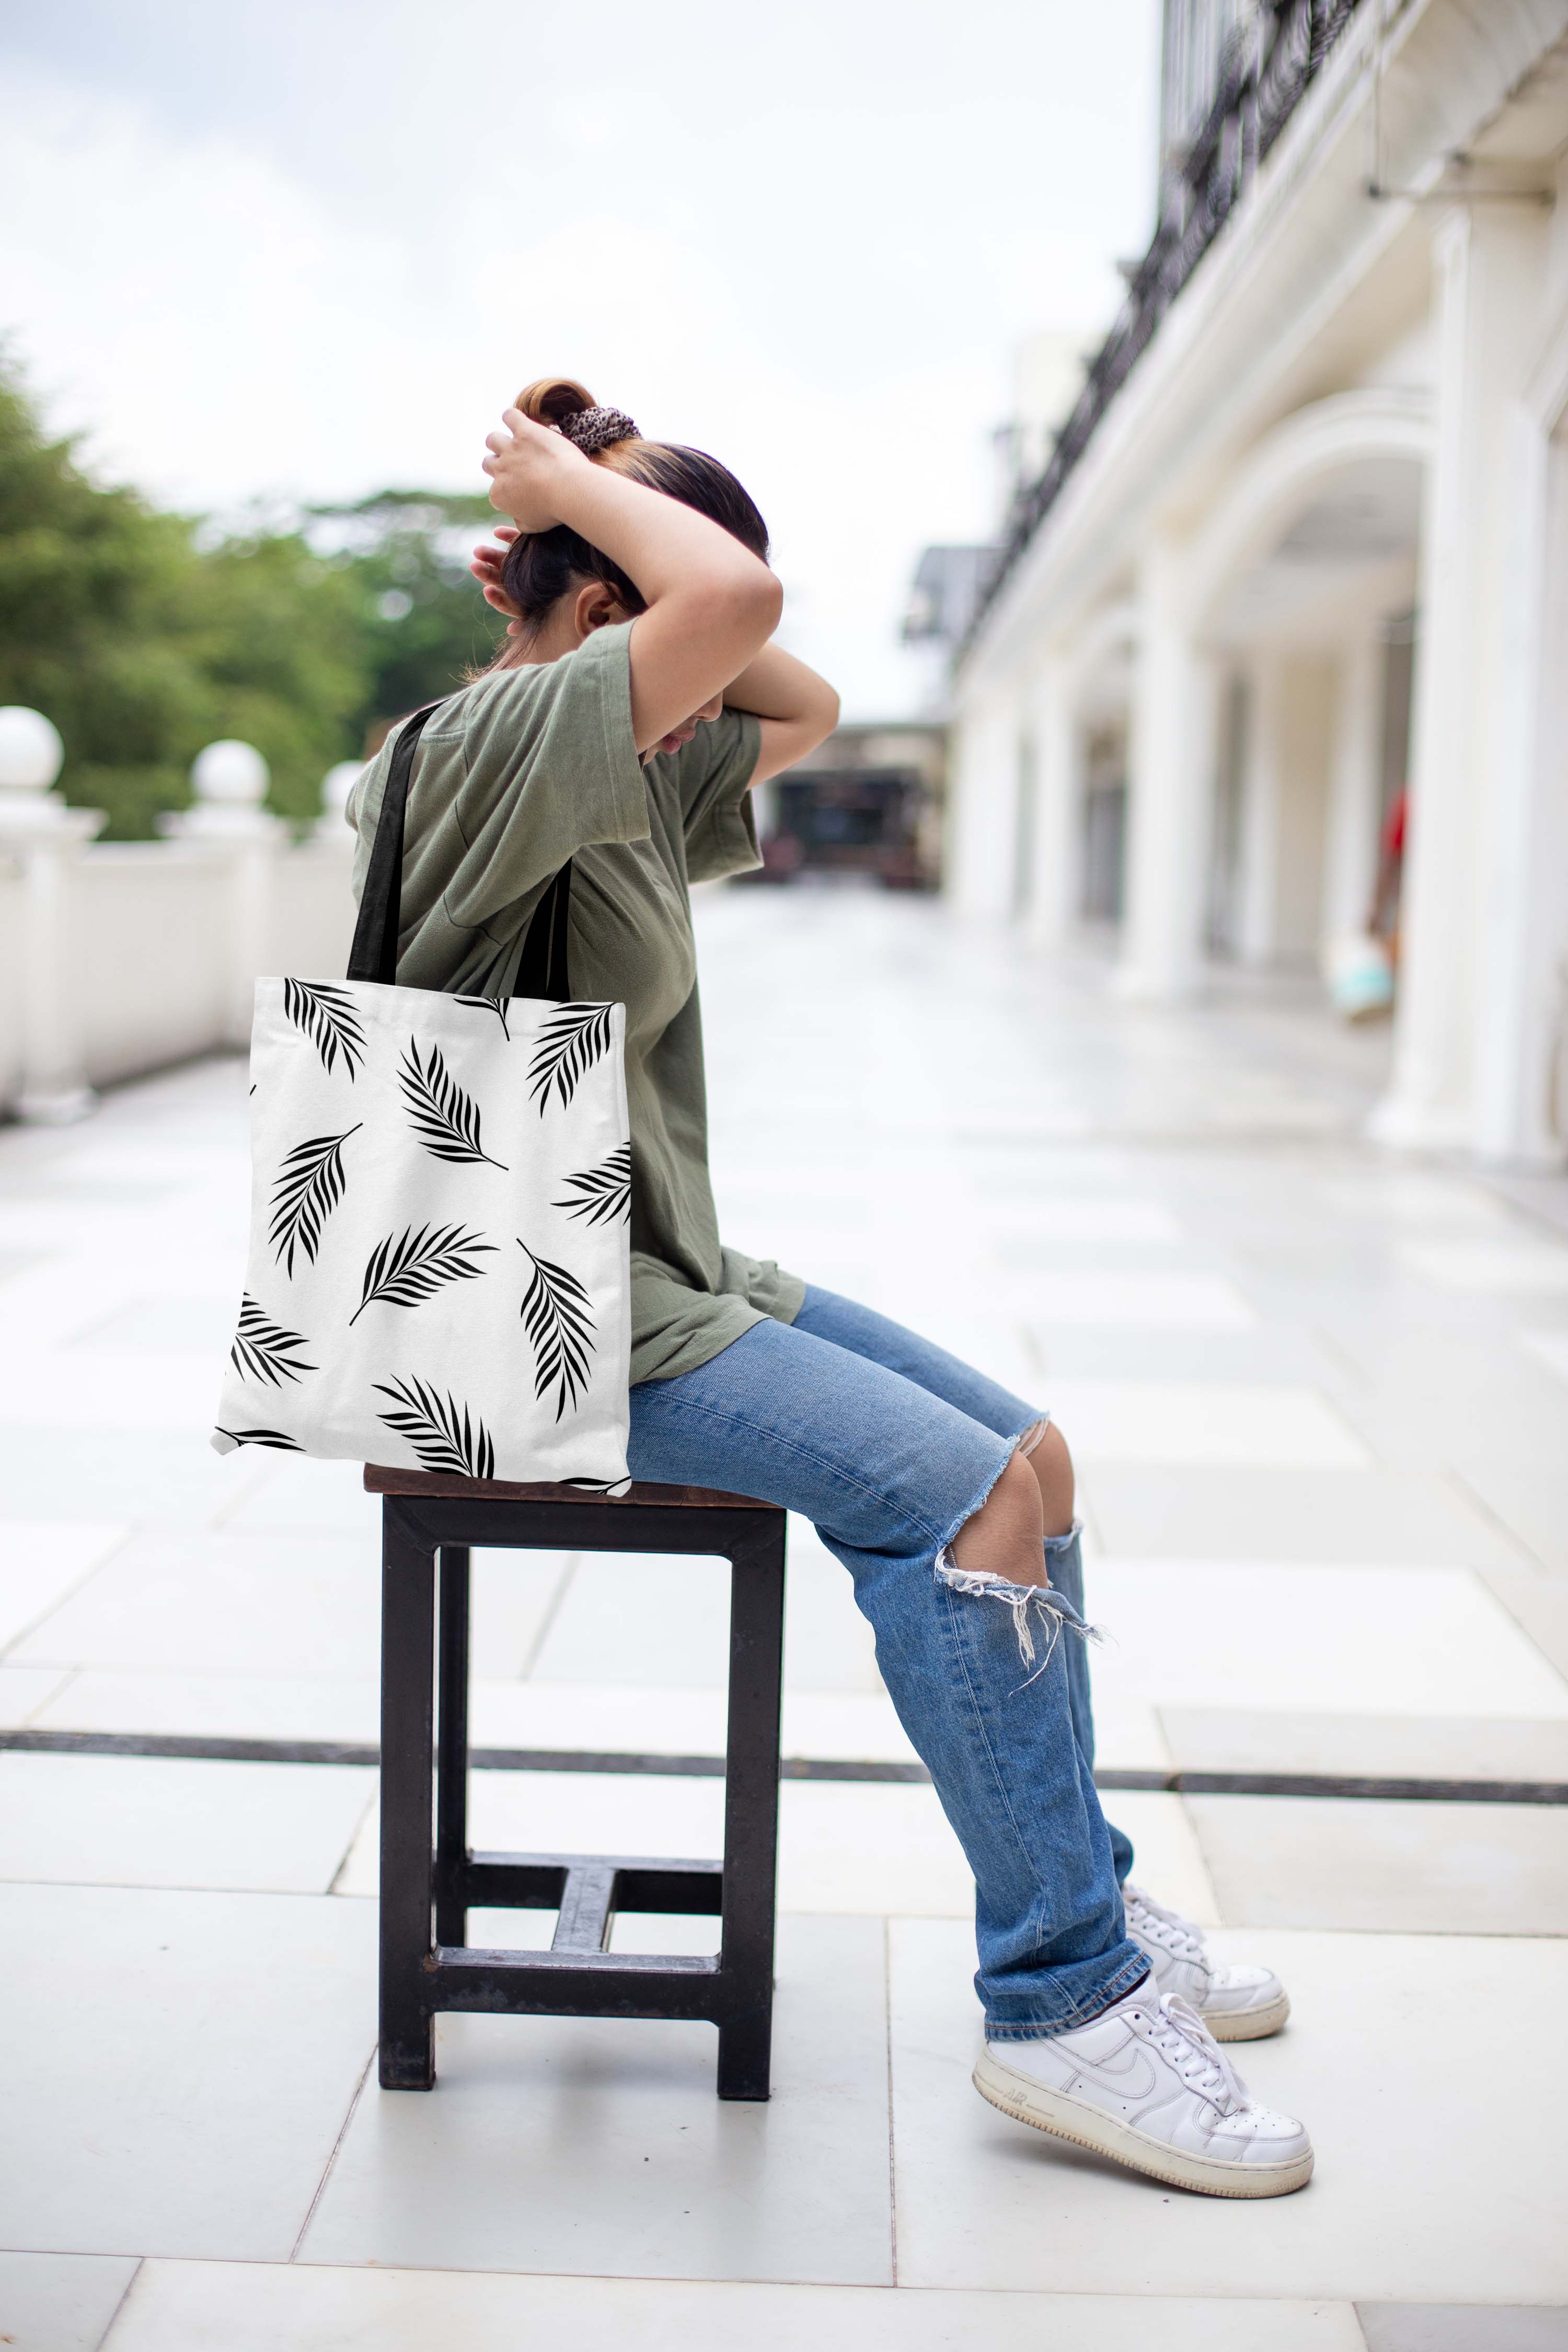 Woman sitting on a chair holding a bag.